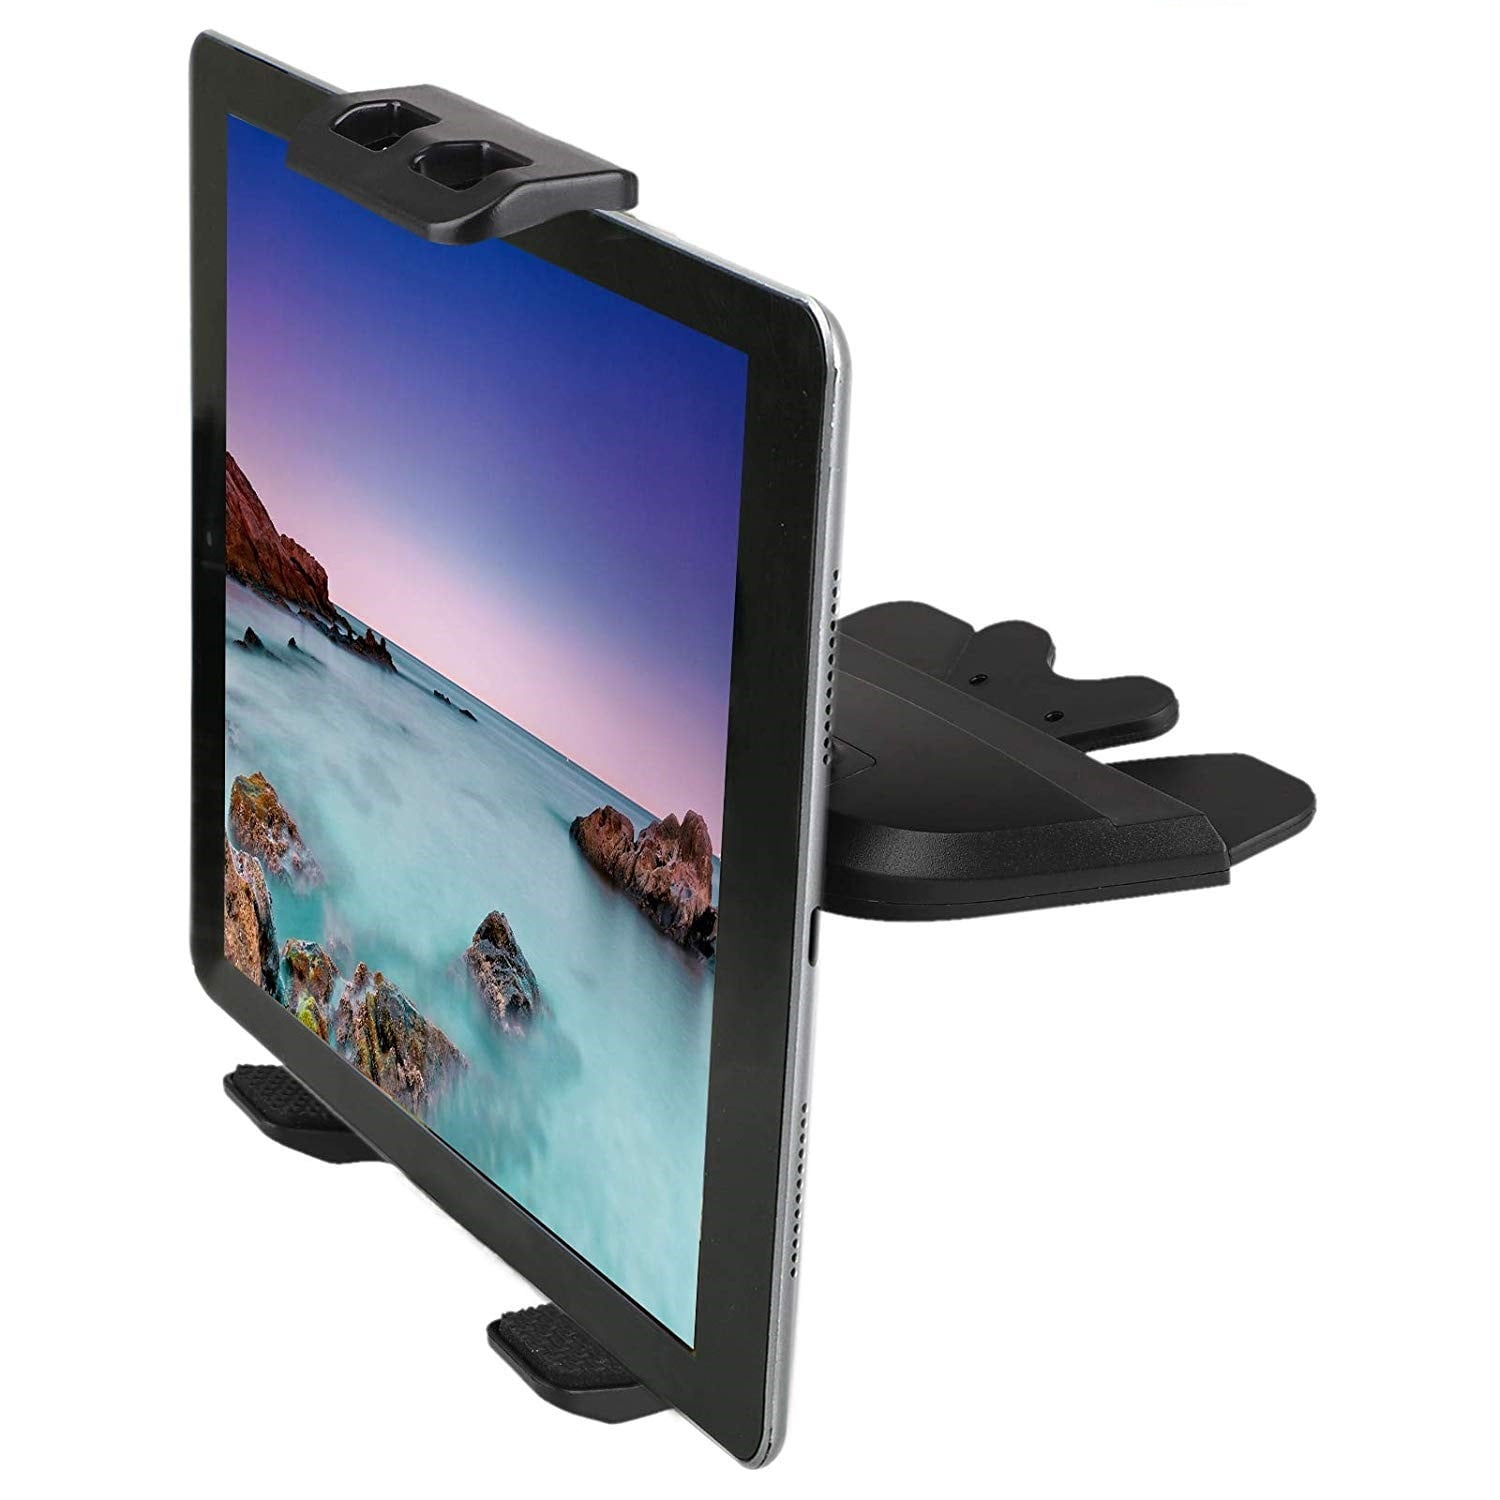 Car Dash Suction Mount Holder Stand Cradle For GPS iPad Galaxy Tablet USA Stock 